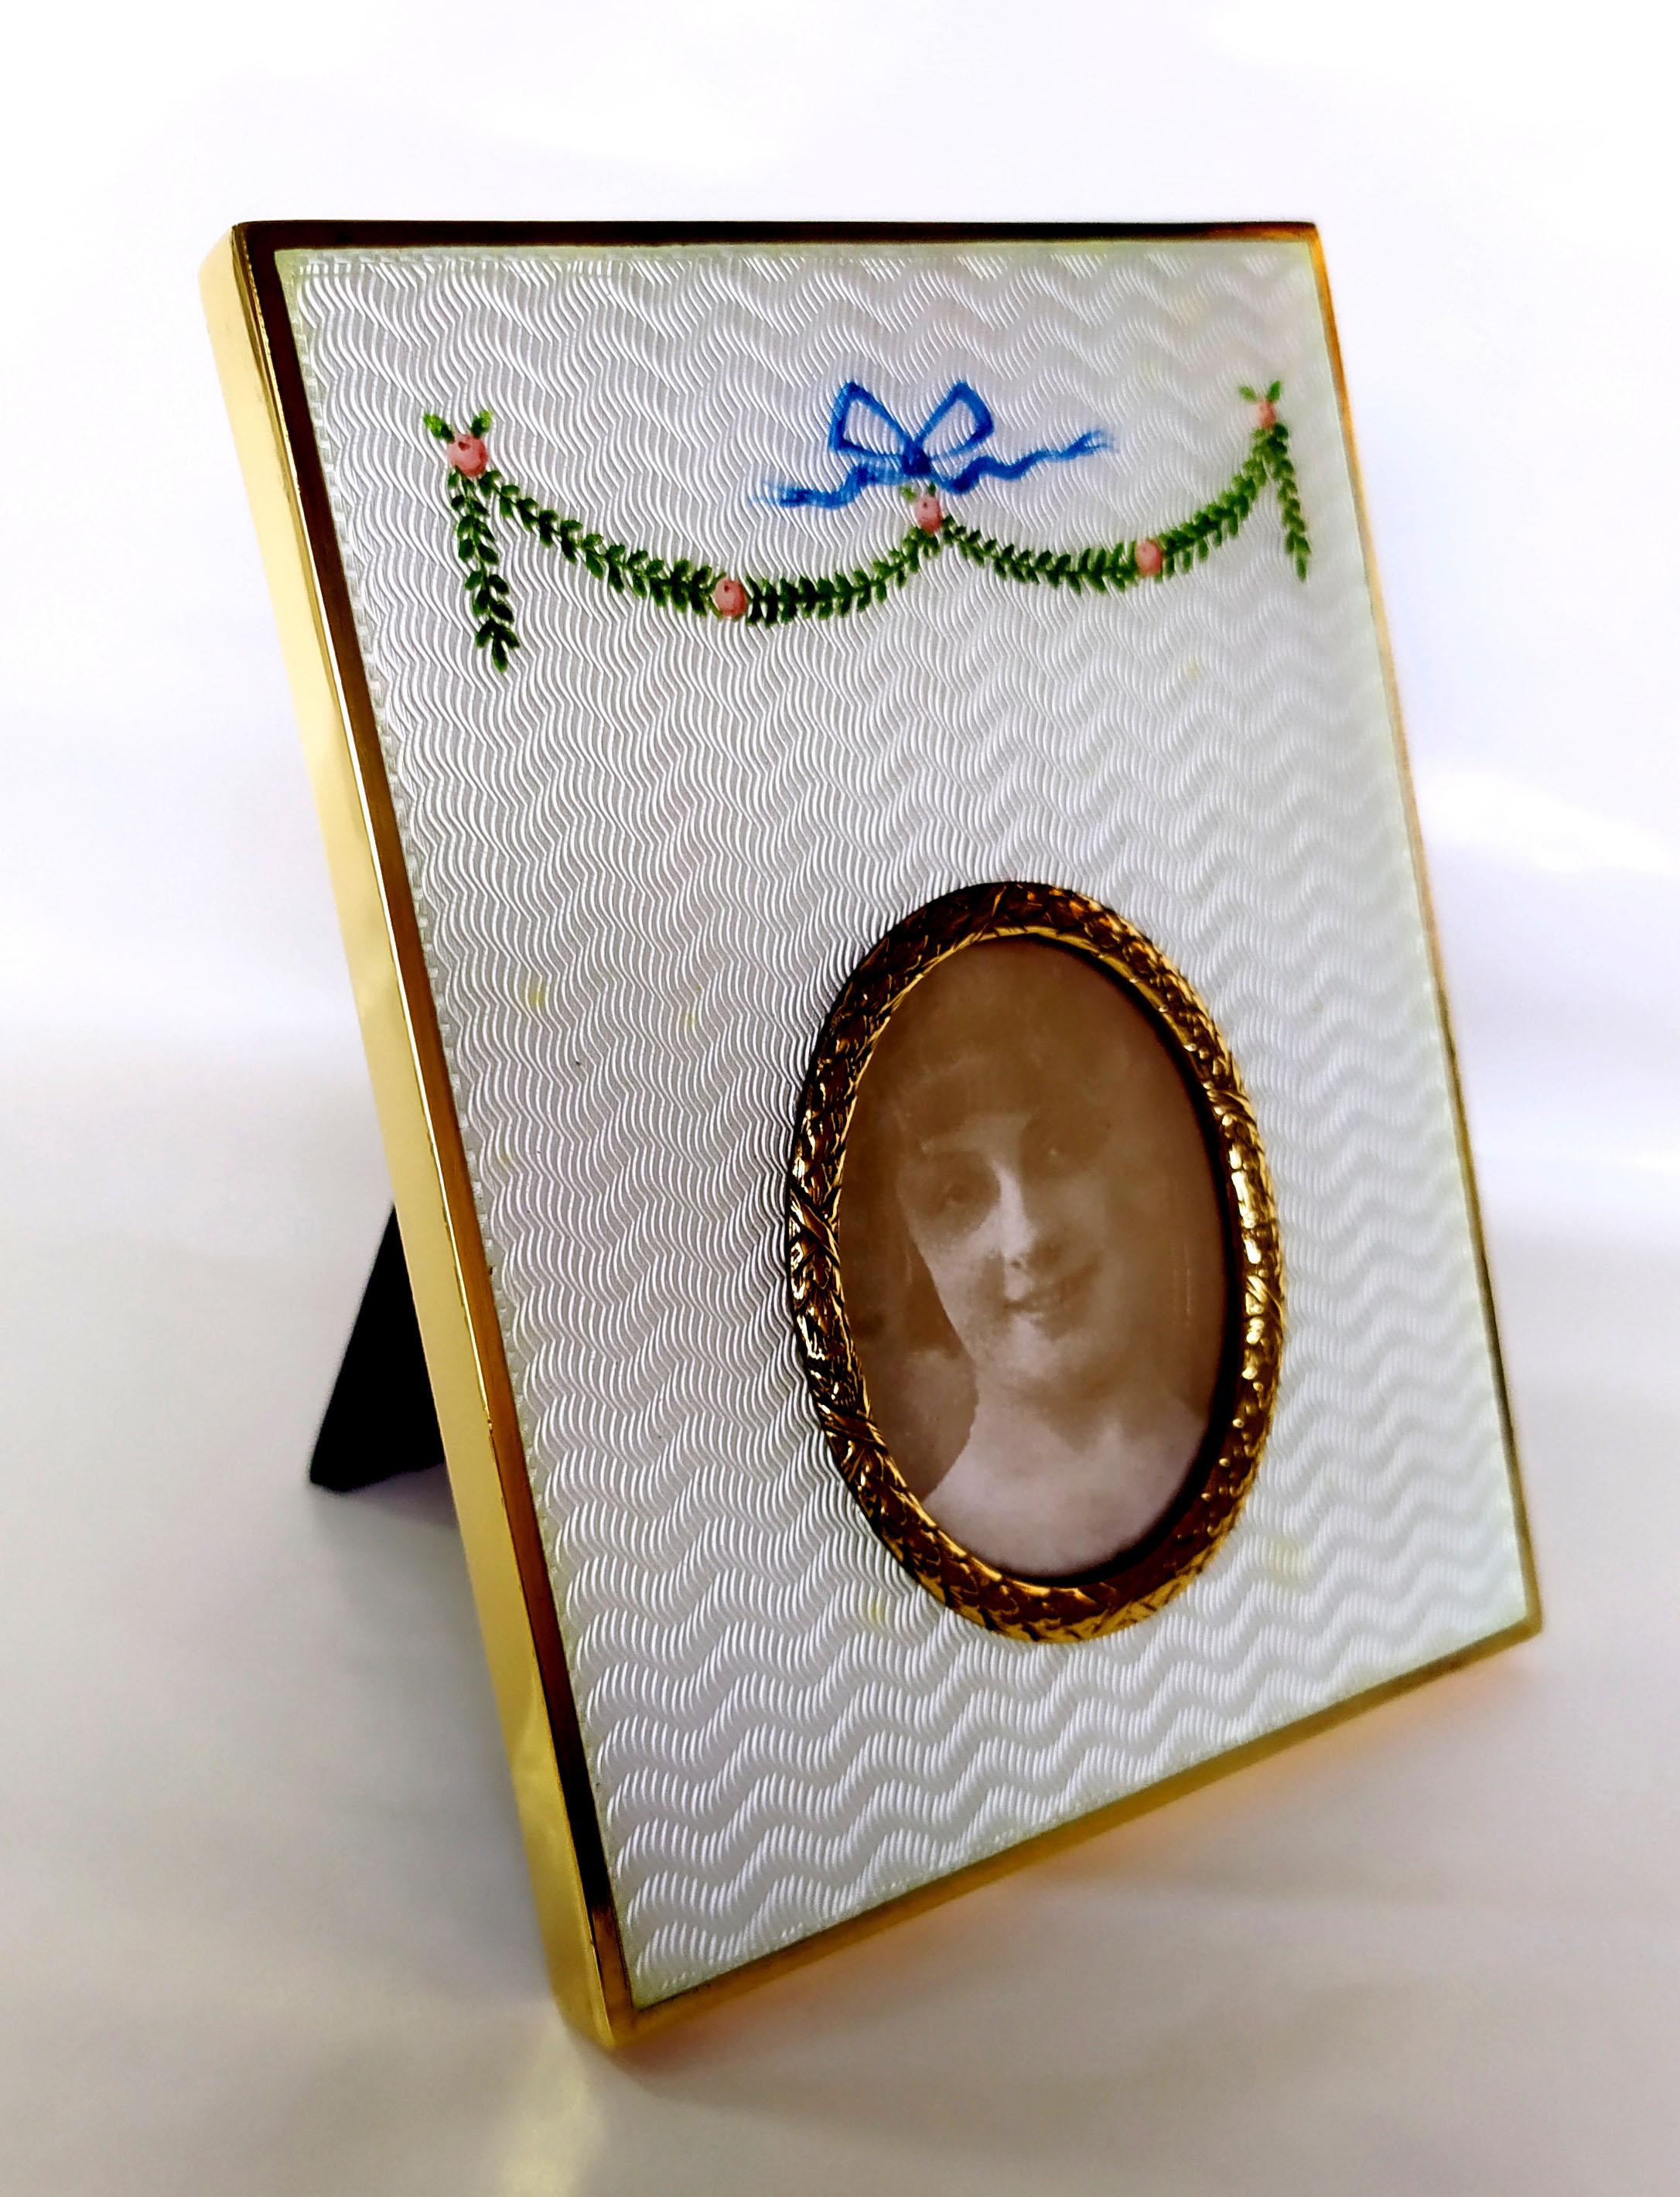 Rectangular photo frame in 925/1000 sterling silver gold plated with translucent fired enamel on guillochè and hand-painted miniature of a garland of flowers with oval border internal size cm. 4 x 5.2 Russian Empire Faberge style. External cm. 10 x